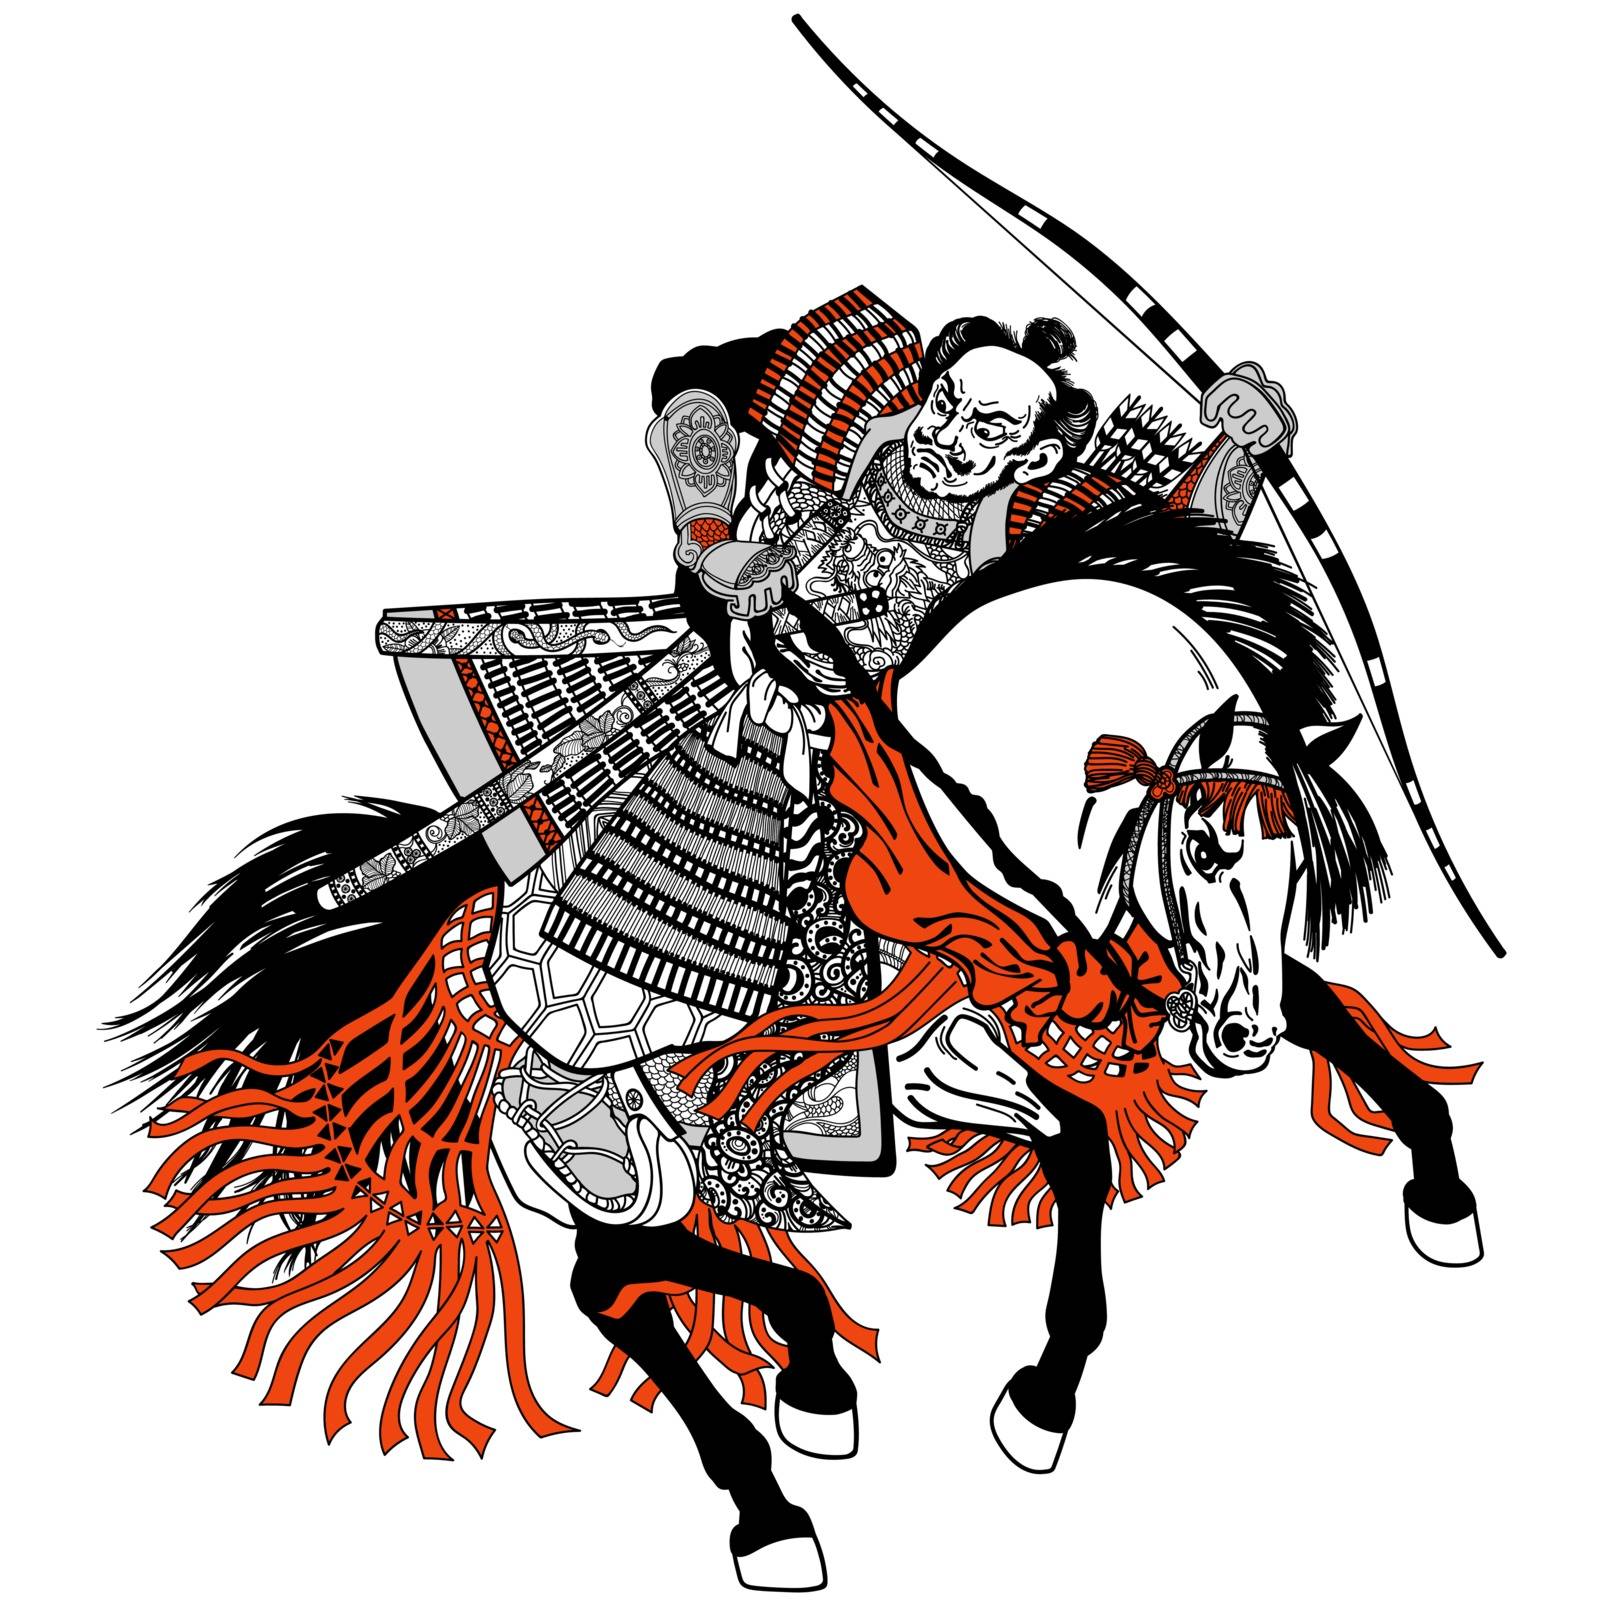 Asian warrior archer. Japanese Samurai horseman sitting on horseback, wearing medieval leather armor and holding a bow. Medieval East Asia soldier riding pony horse in the gallop. Black Grey Red vector